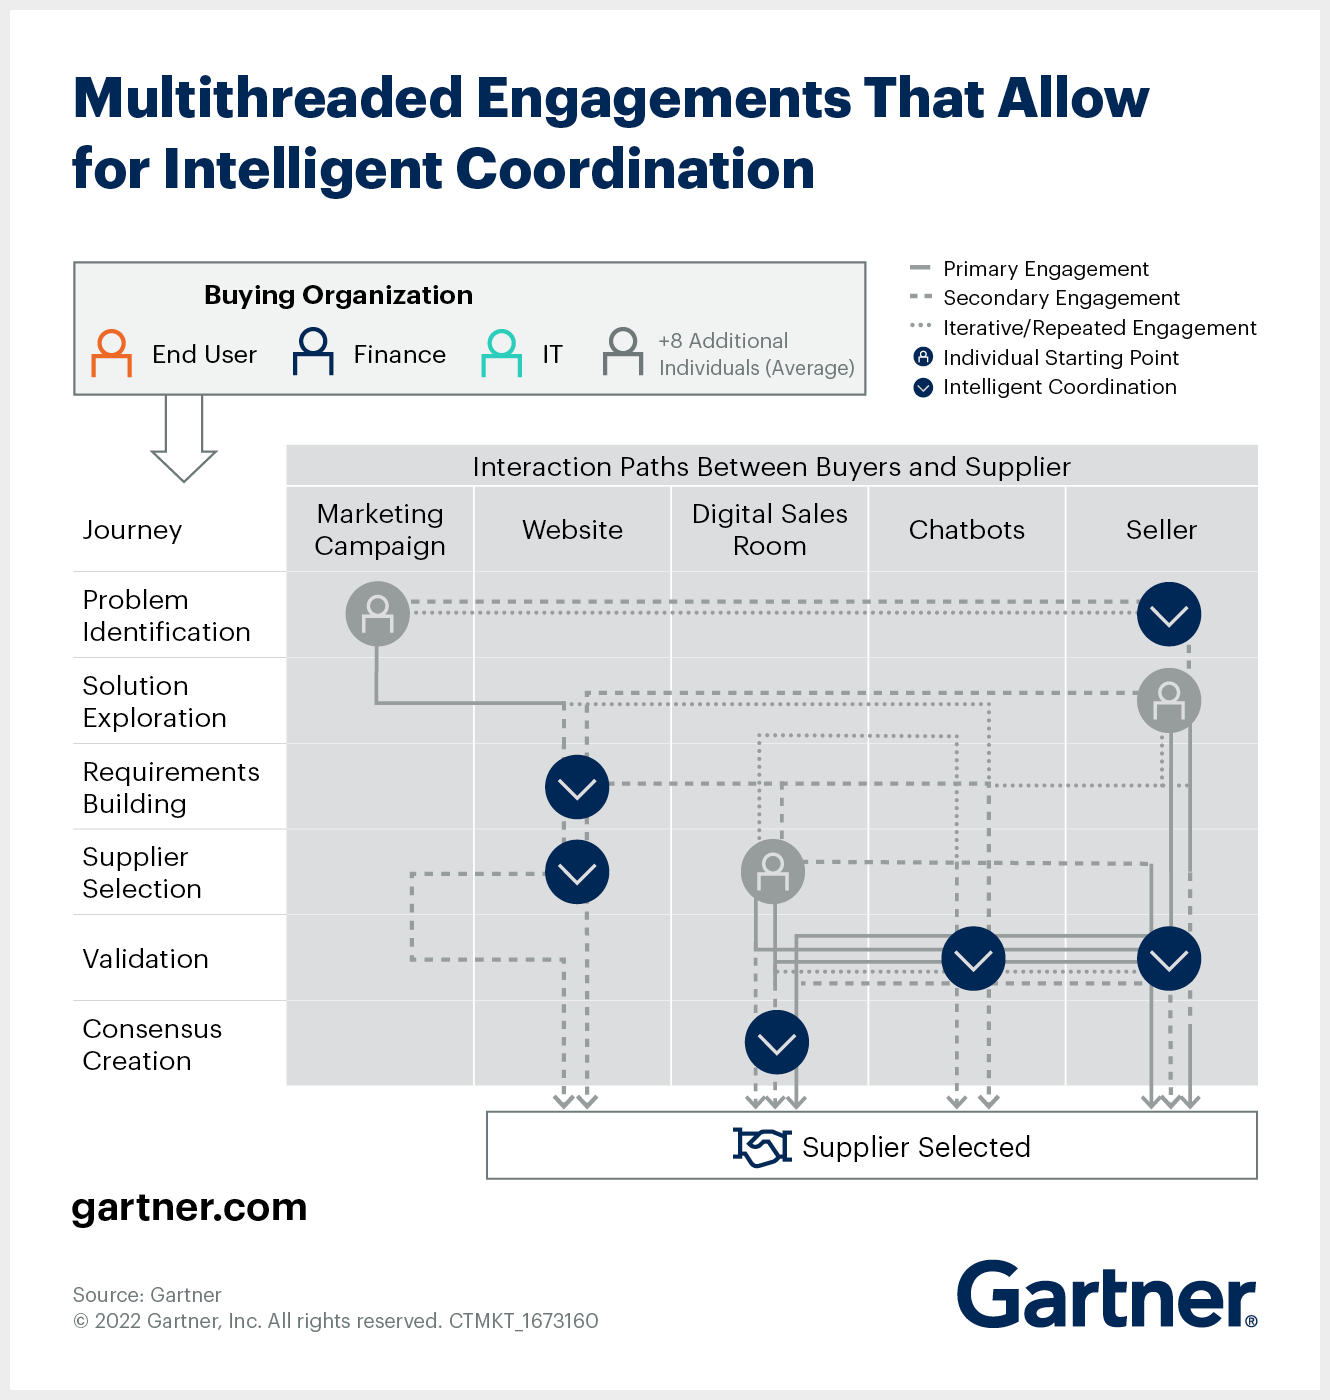 Multithreaded Engagements That Allow for Intelligent Coordination